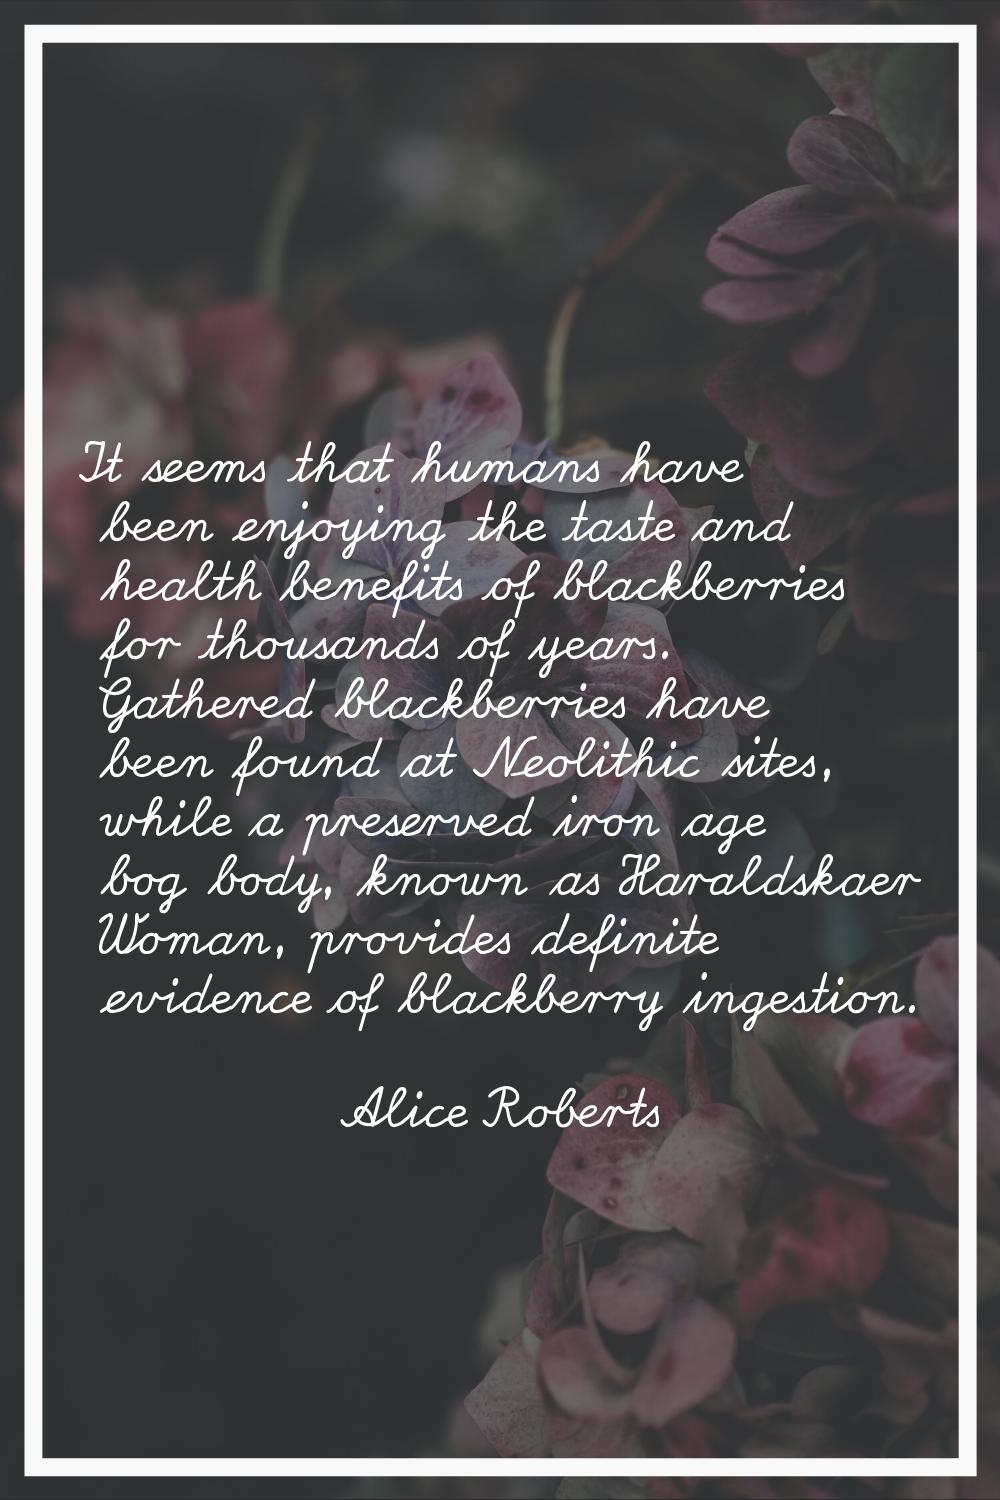 It seems that humans have been enjoying the taste and health benefits of blackberries for thousands